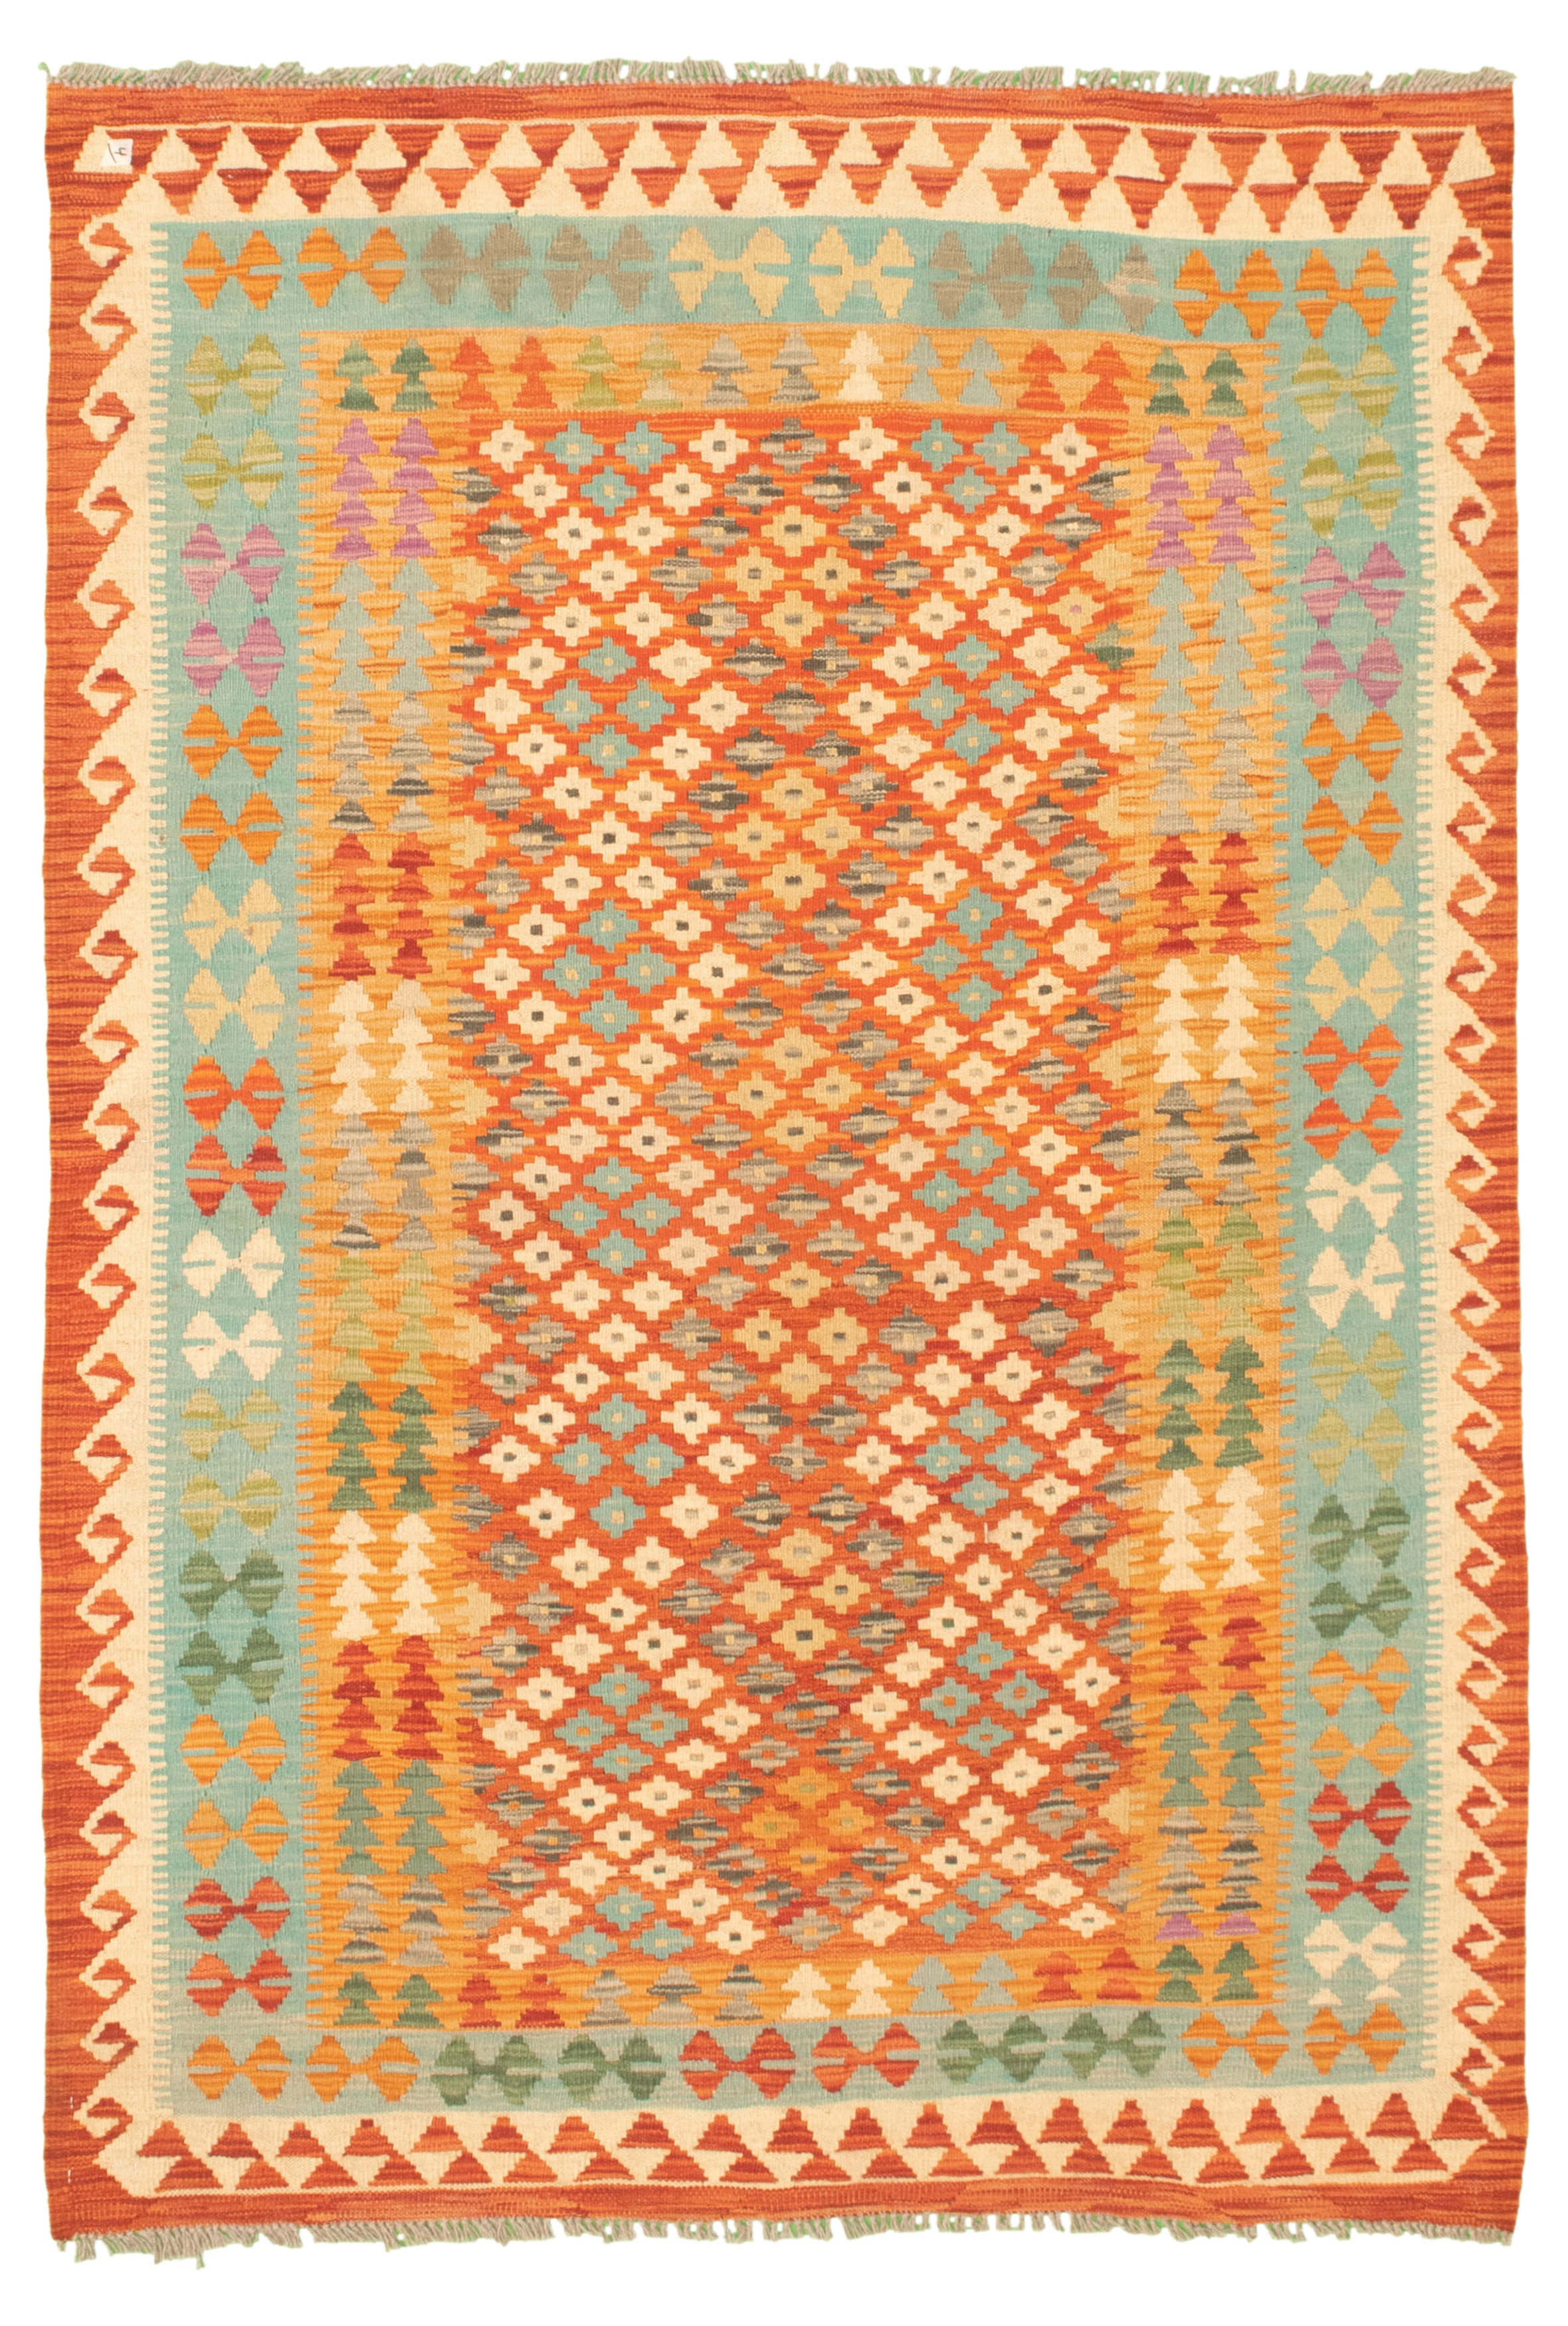 Hand woven Bold and Colorful  Dark Copper Wool Kilim 4'4" x 6'4"  Size: 4'4" x 6'4"  